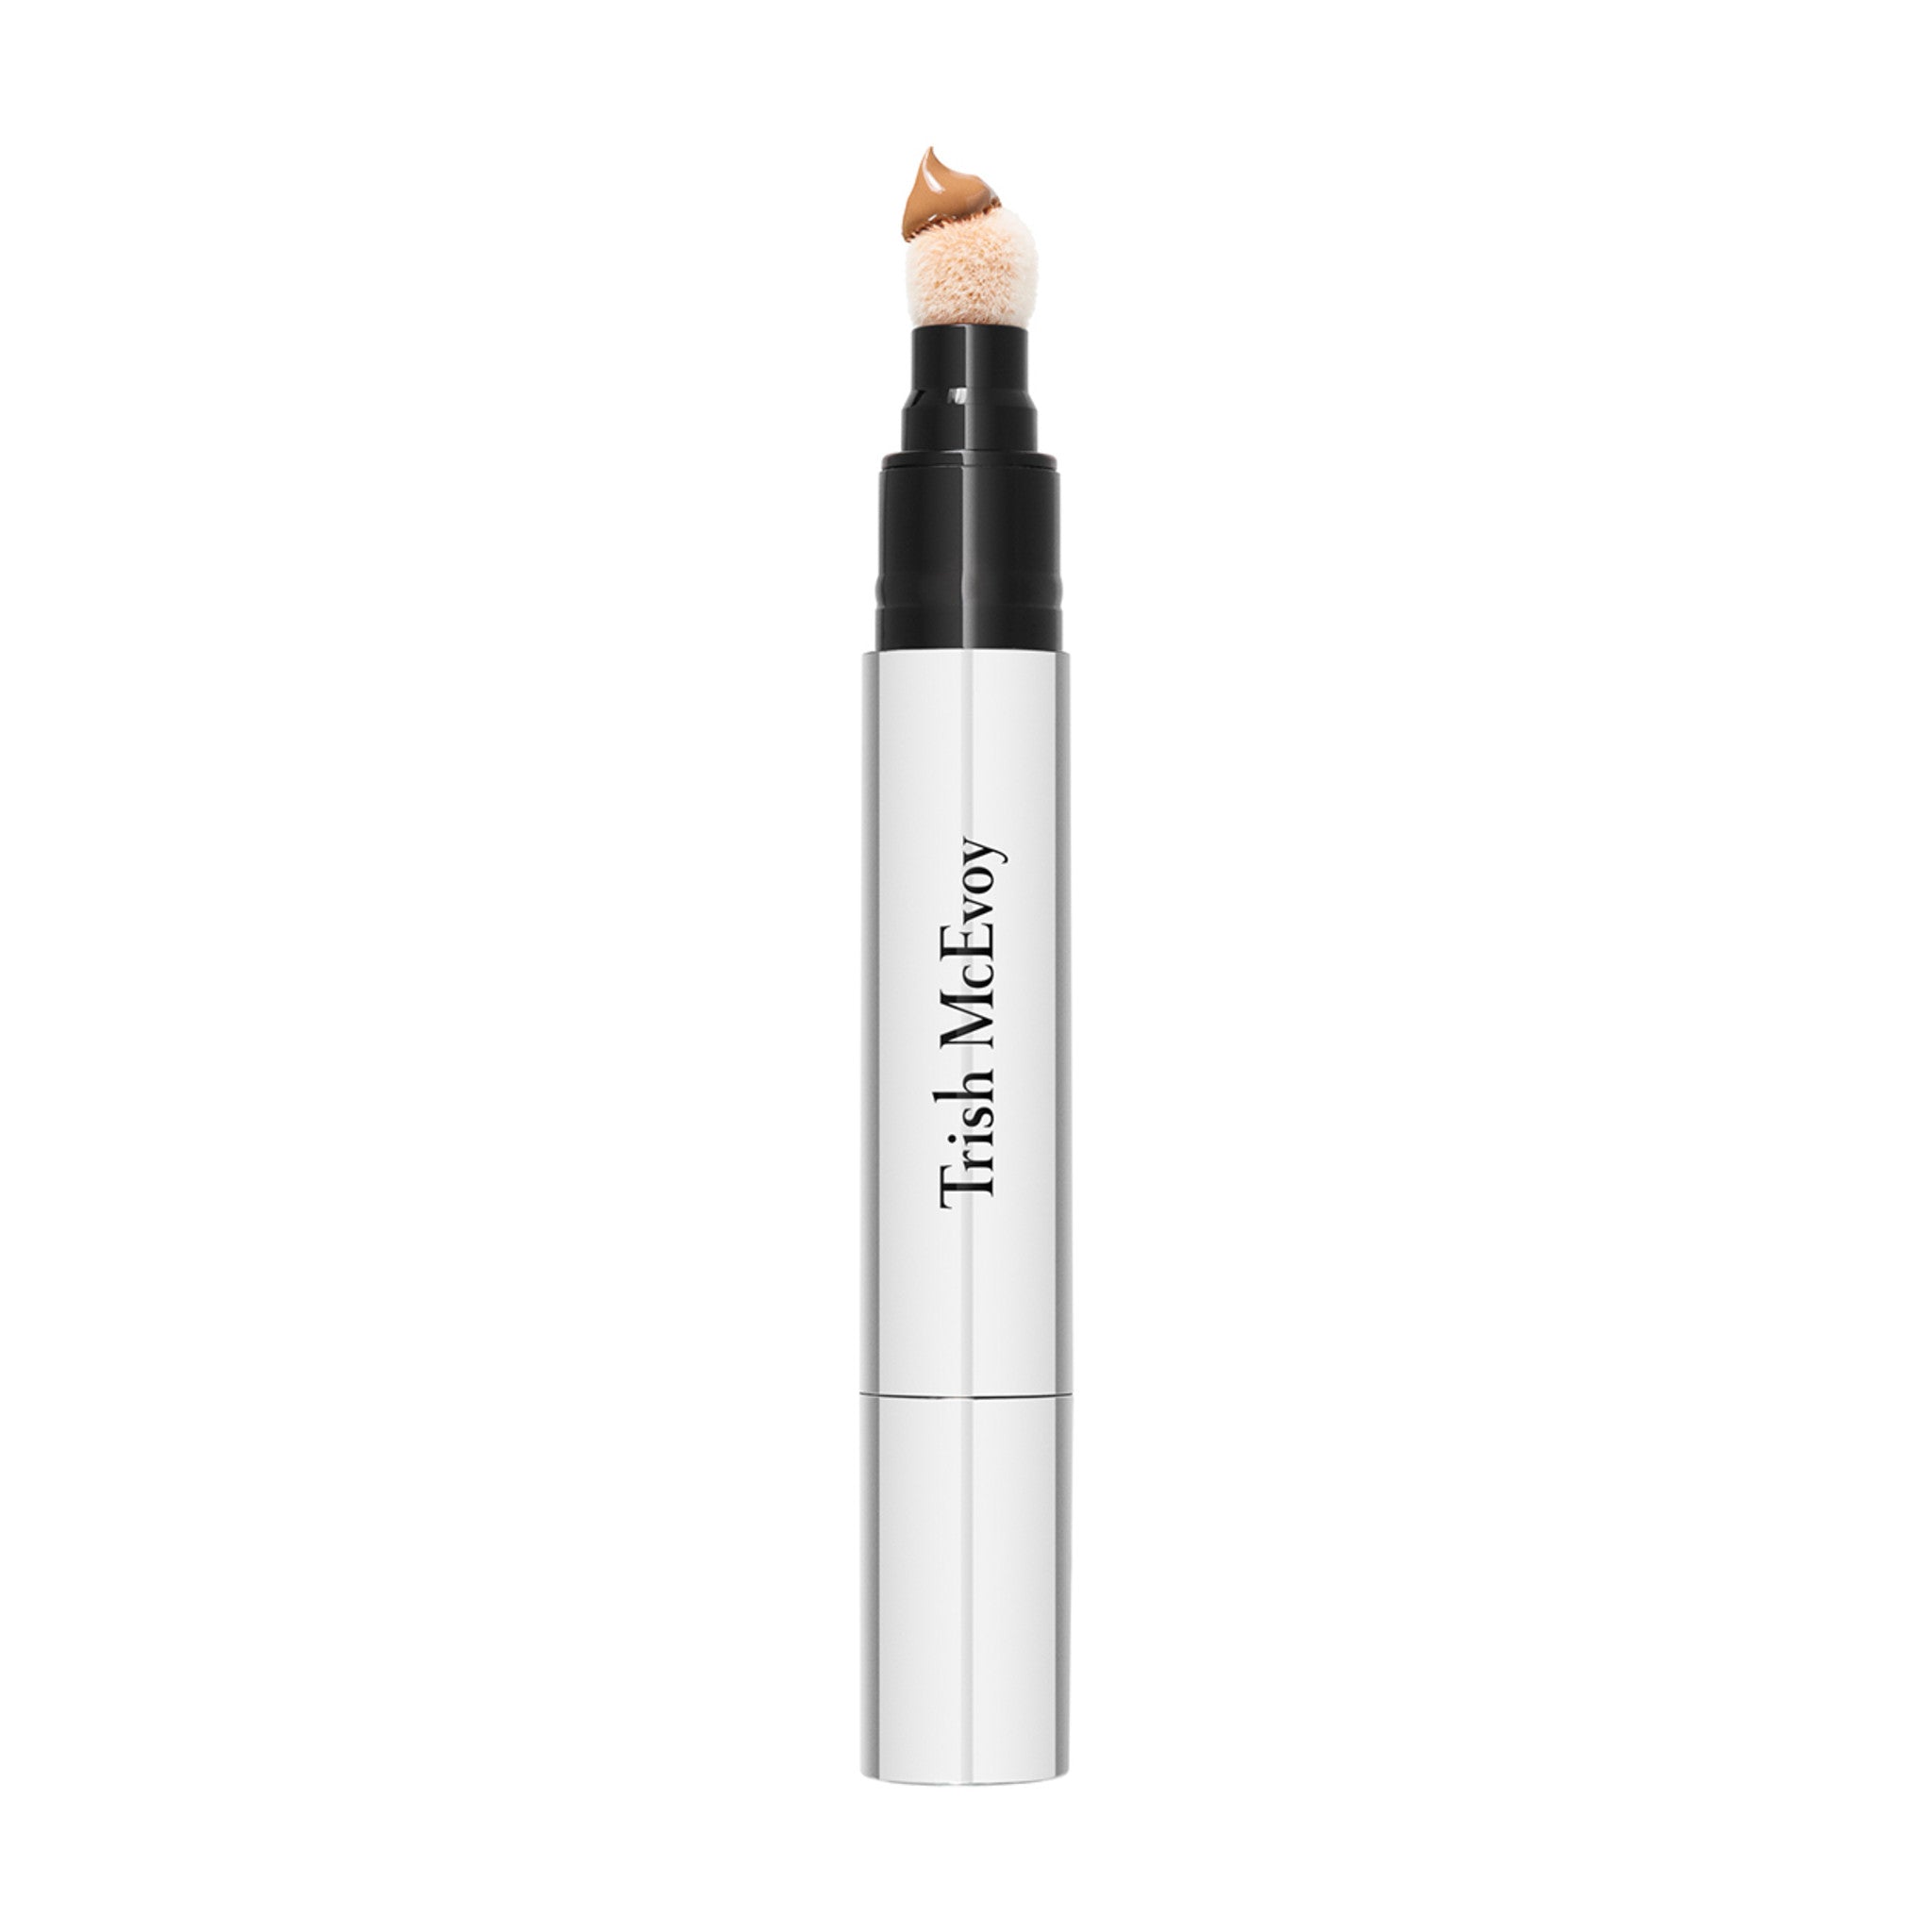 Trish McEvoy Correct and Even Full-Face Perfector Color/Shade variant: Shade 3 main image. This product is for medium warm complexions